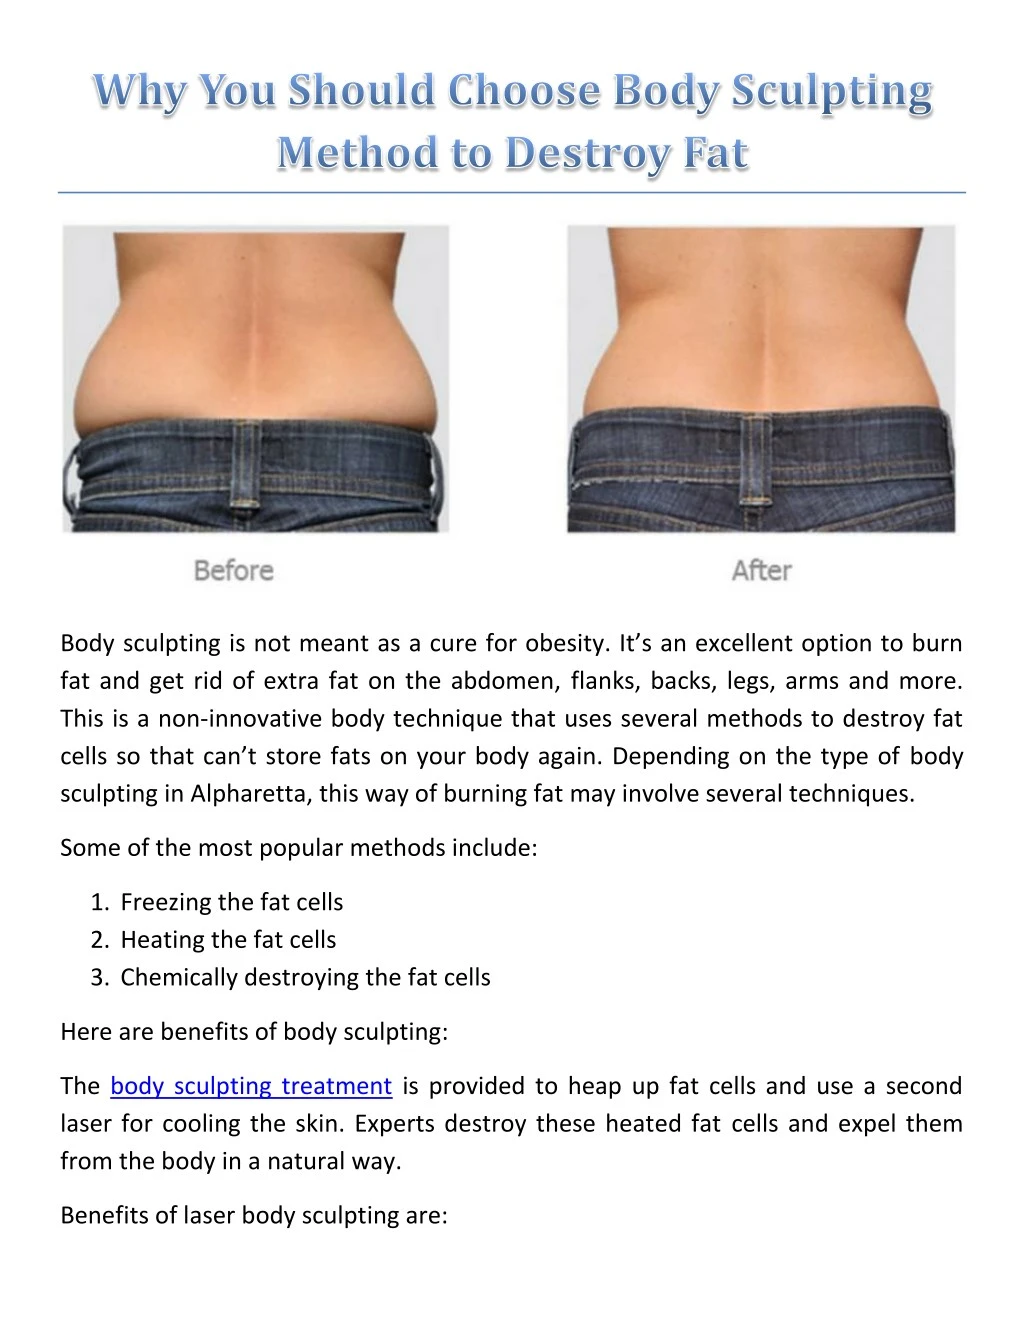 body sculpting is not meant as a cure for obesity